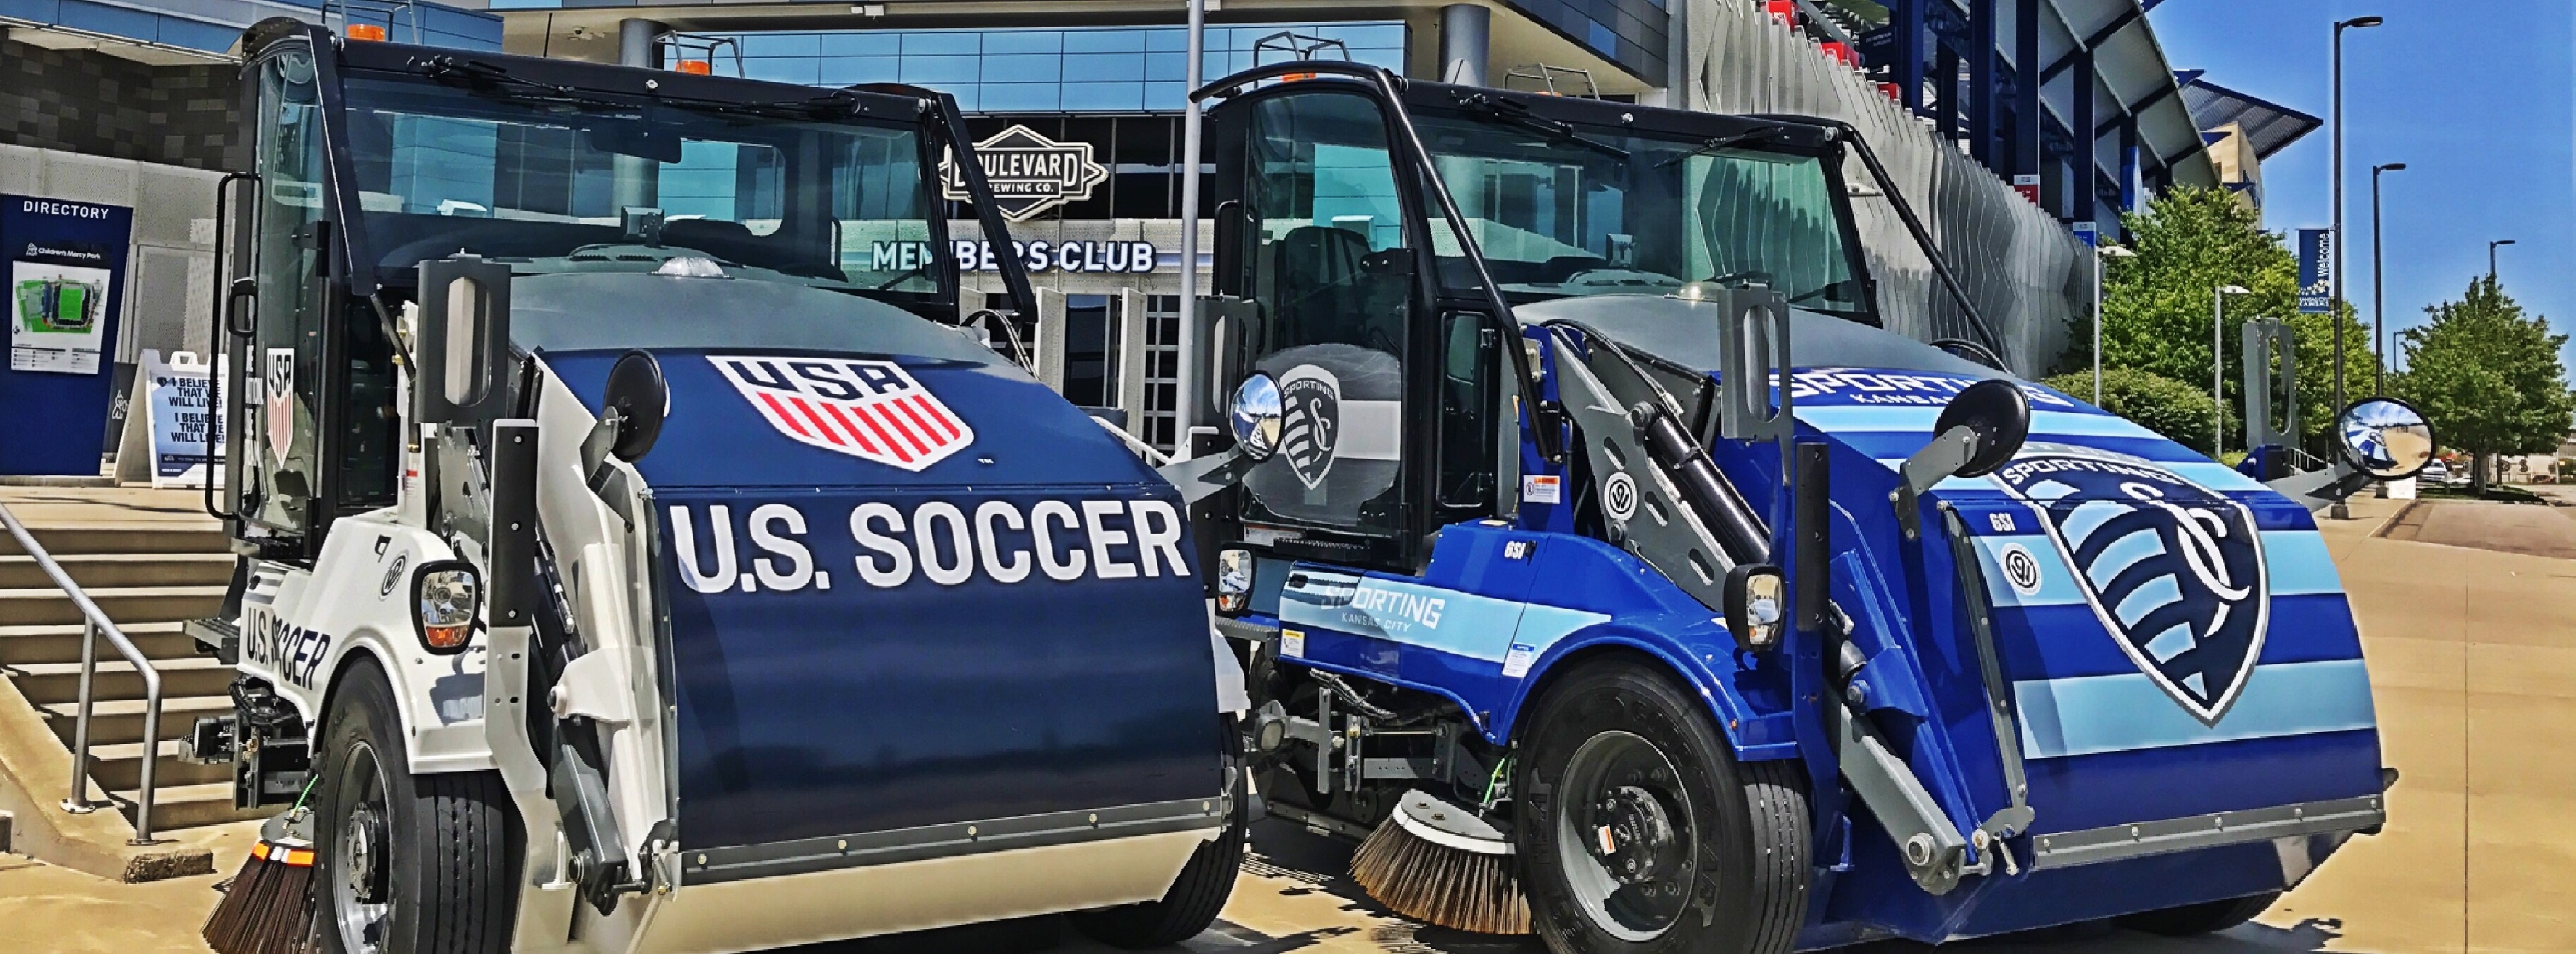 A photograph of Public Works Street cleaners parked in front of Sporting KC.